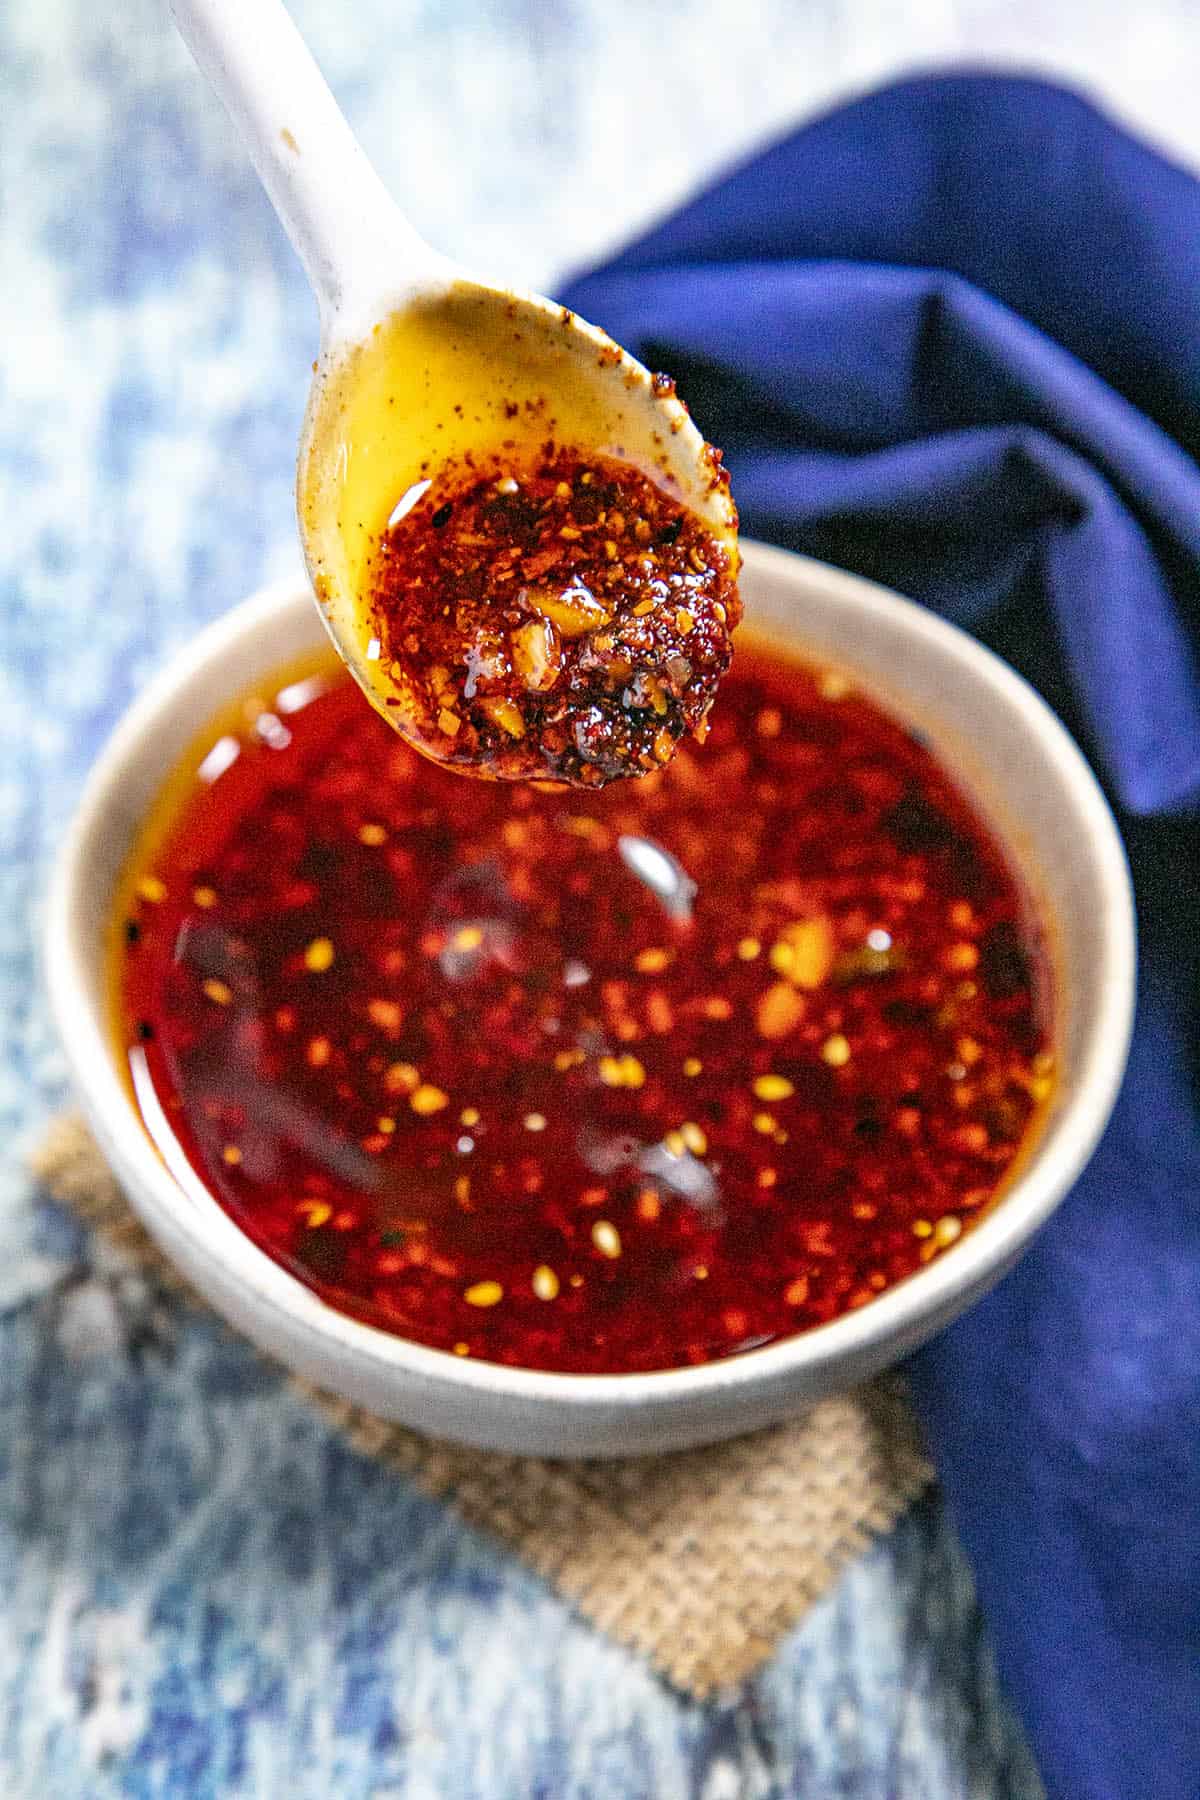 Rayu (Japanese Chili Oil) in a bowl, dripping from a spoon